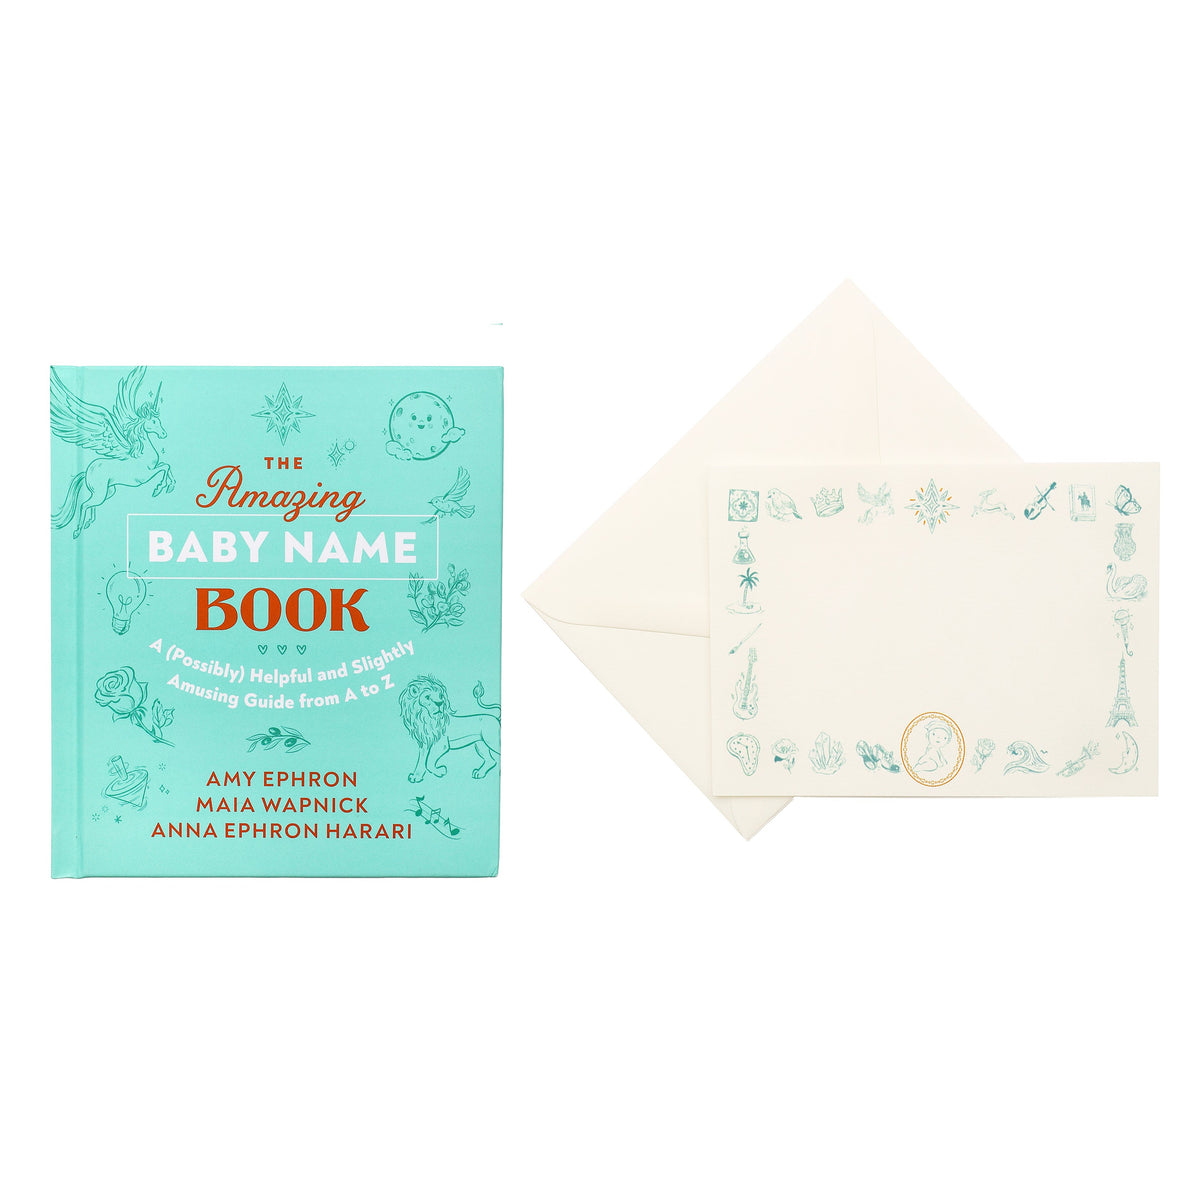 Stationery Card Set with Book in Blue